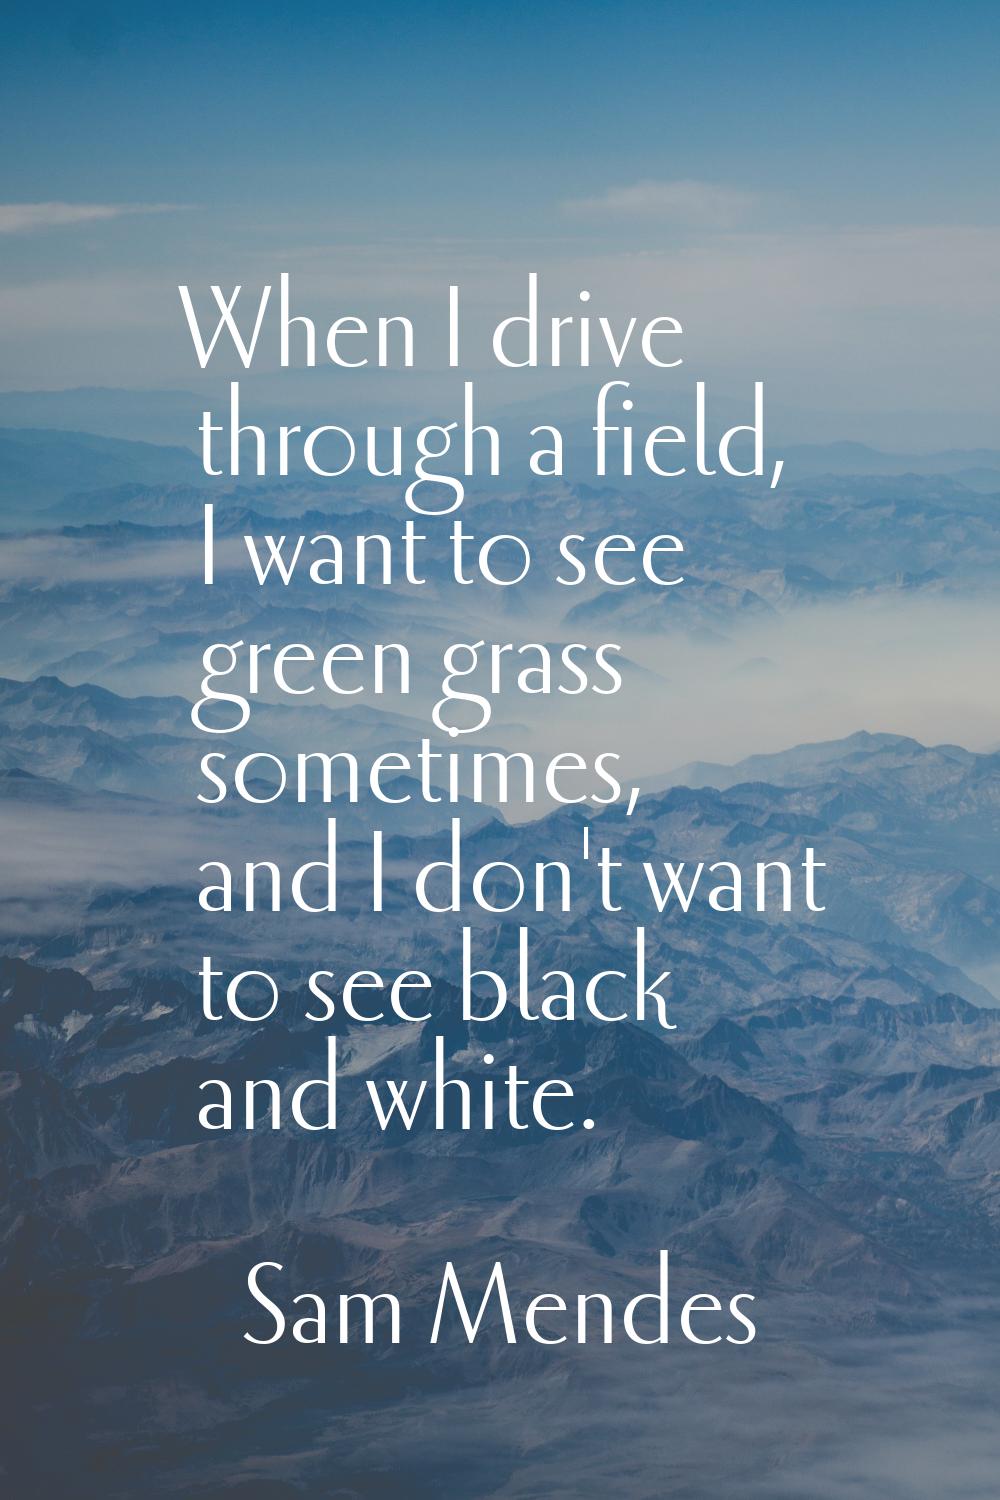 When I drive through a field, I want to see green grass sometimes, and I don't want to see black an